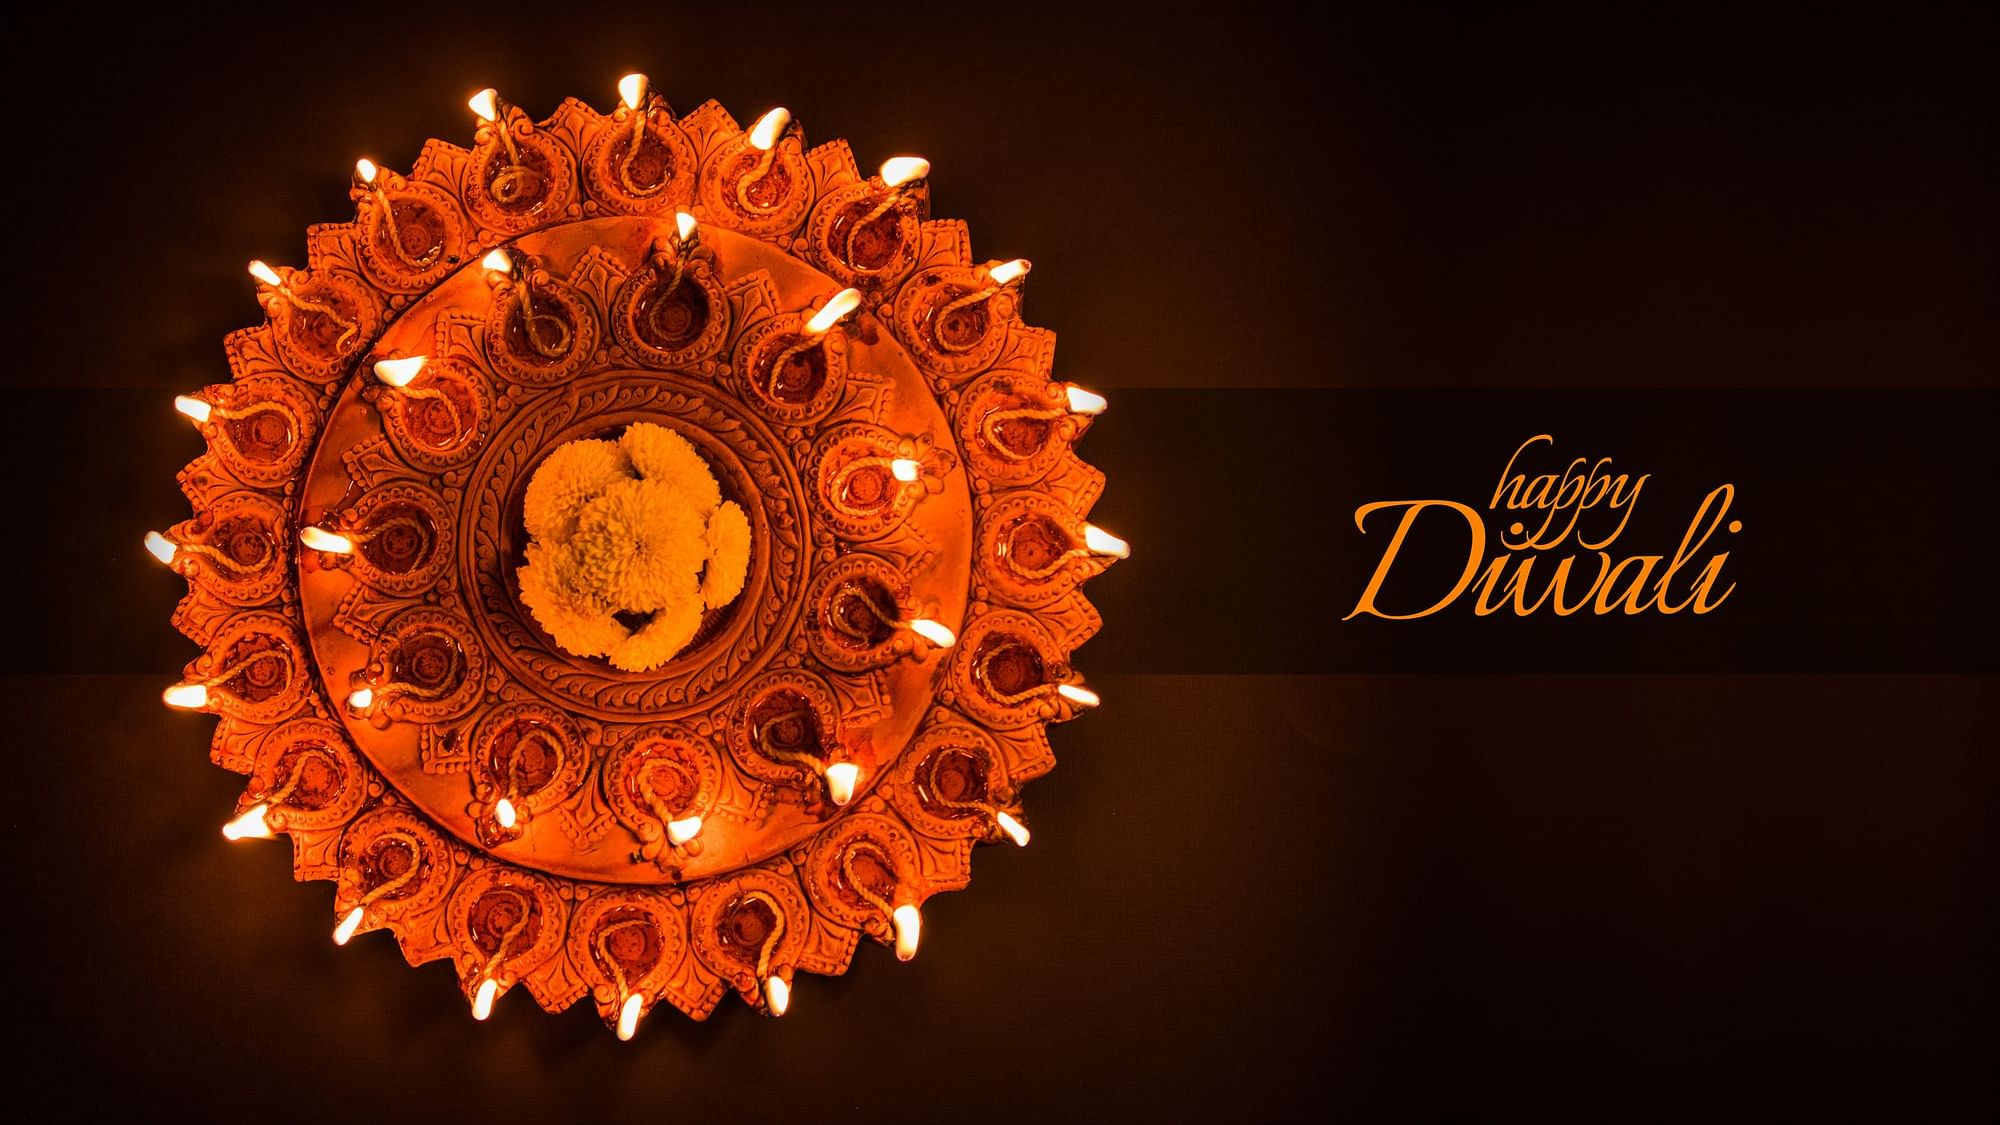 Happy Diwali/Deepavali 2020 Quotes, Images, and Wishes in Hindi, English.